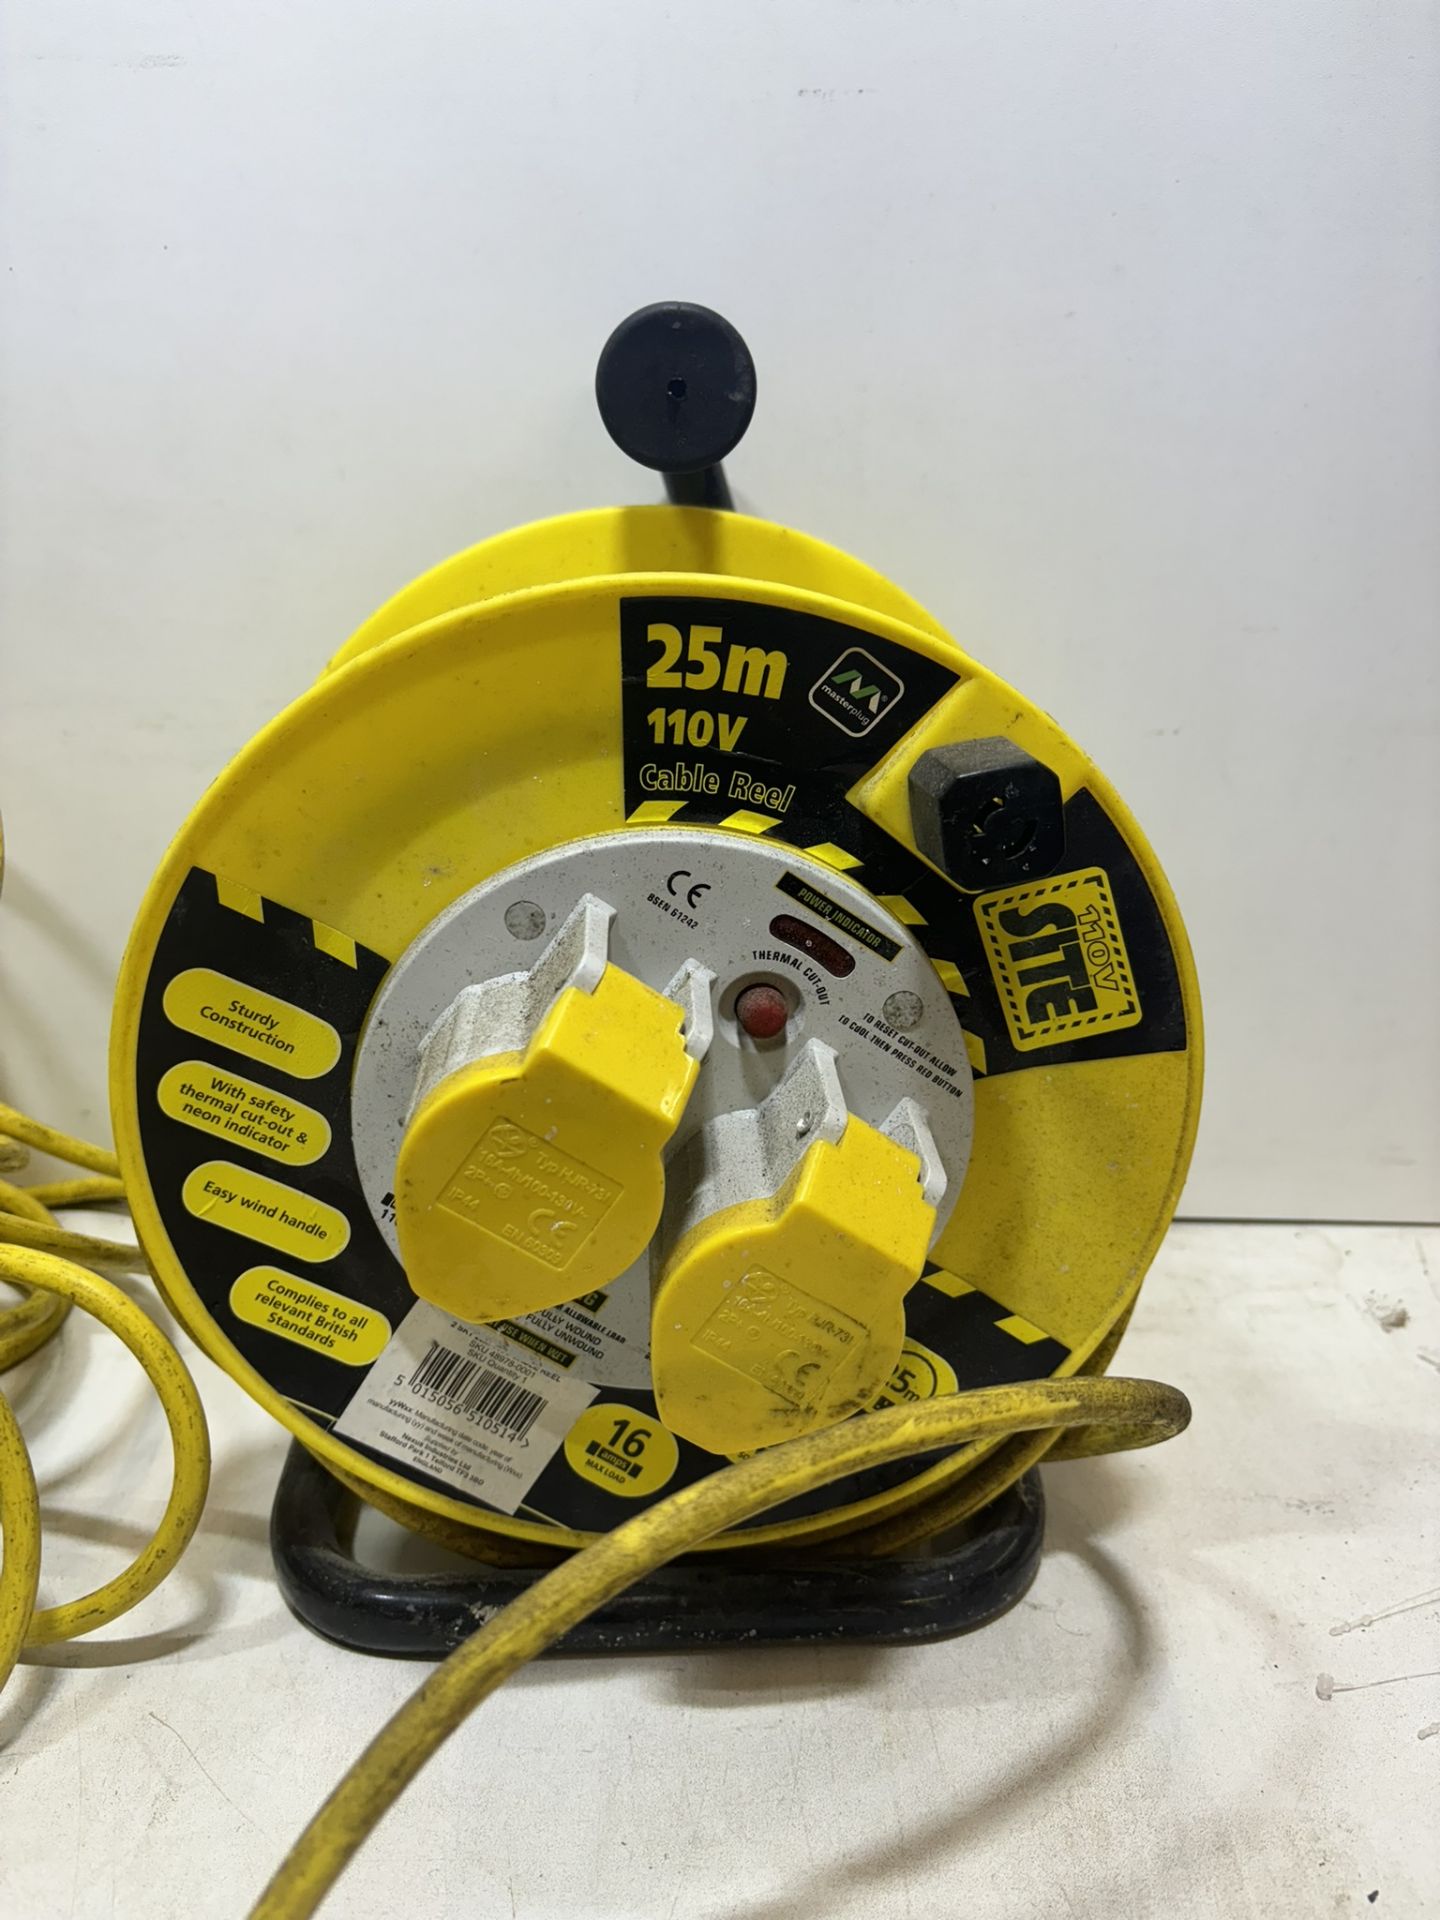 16A 2-GANG 25M CABLE REEL WITH LOCKING BRAKE 110V With 2 16A Extension Leads - Image 2 of 5